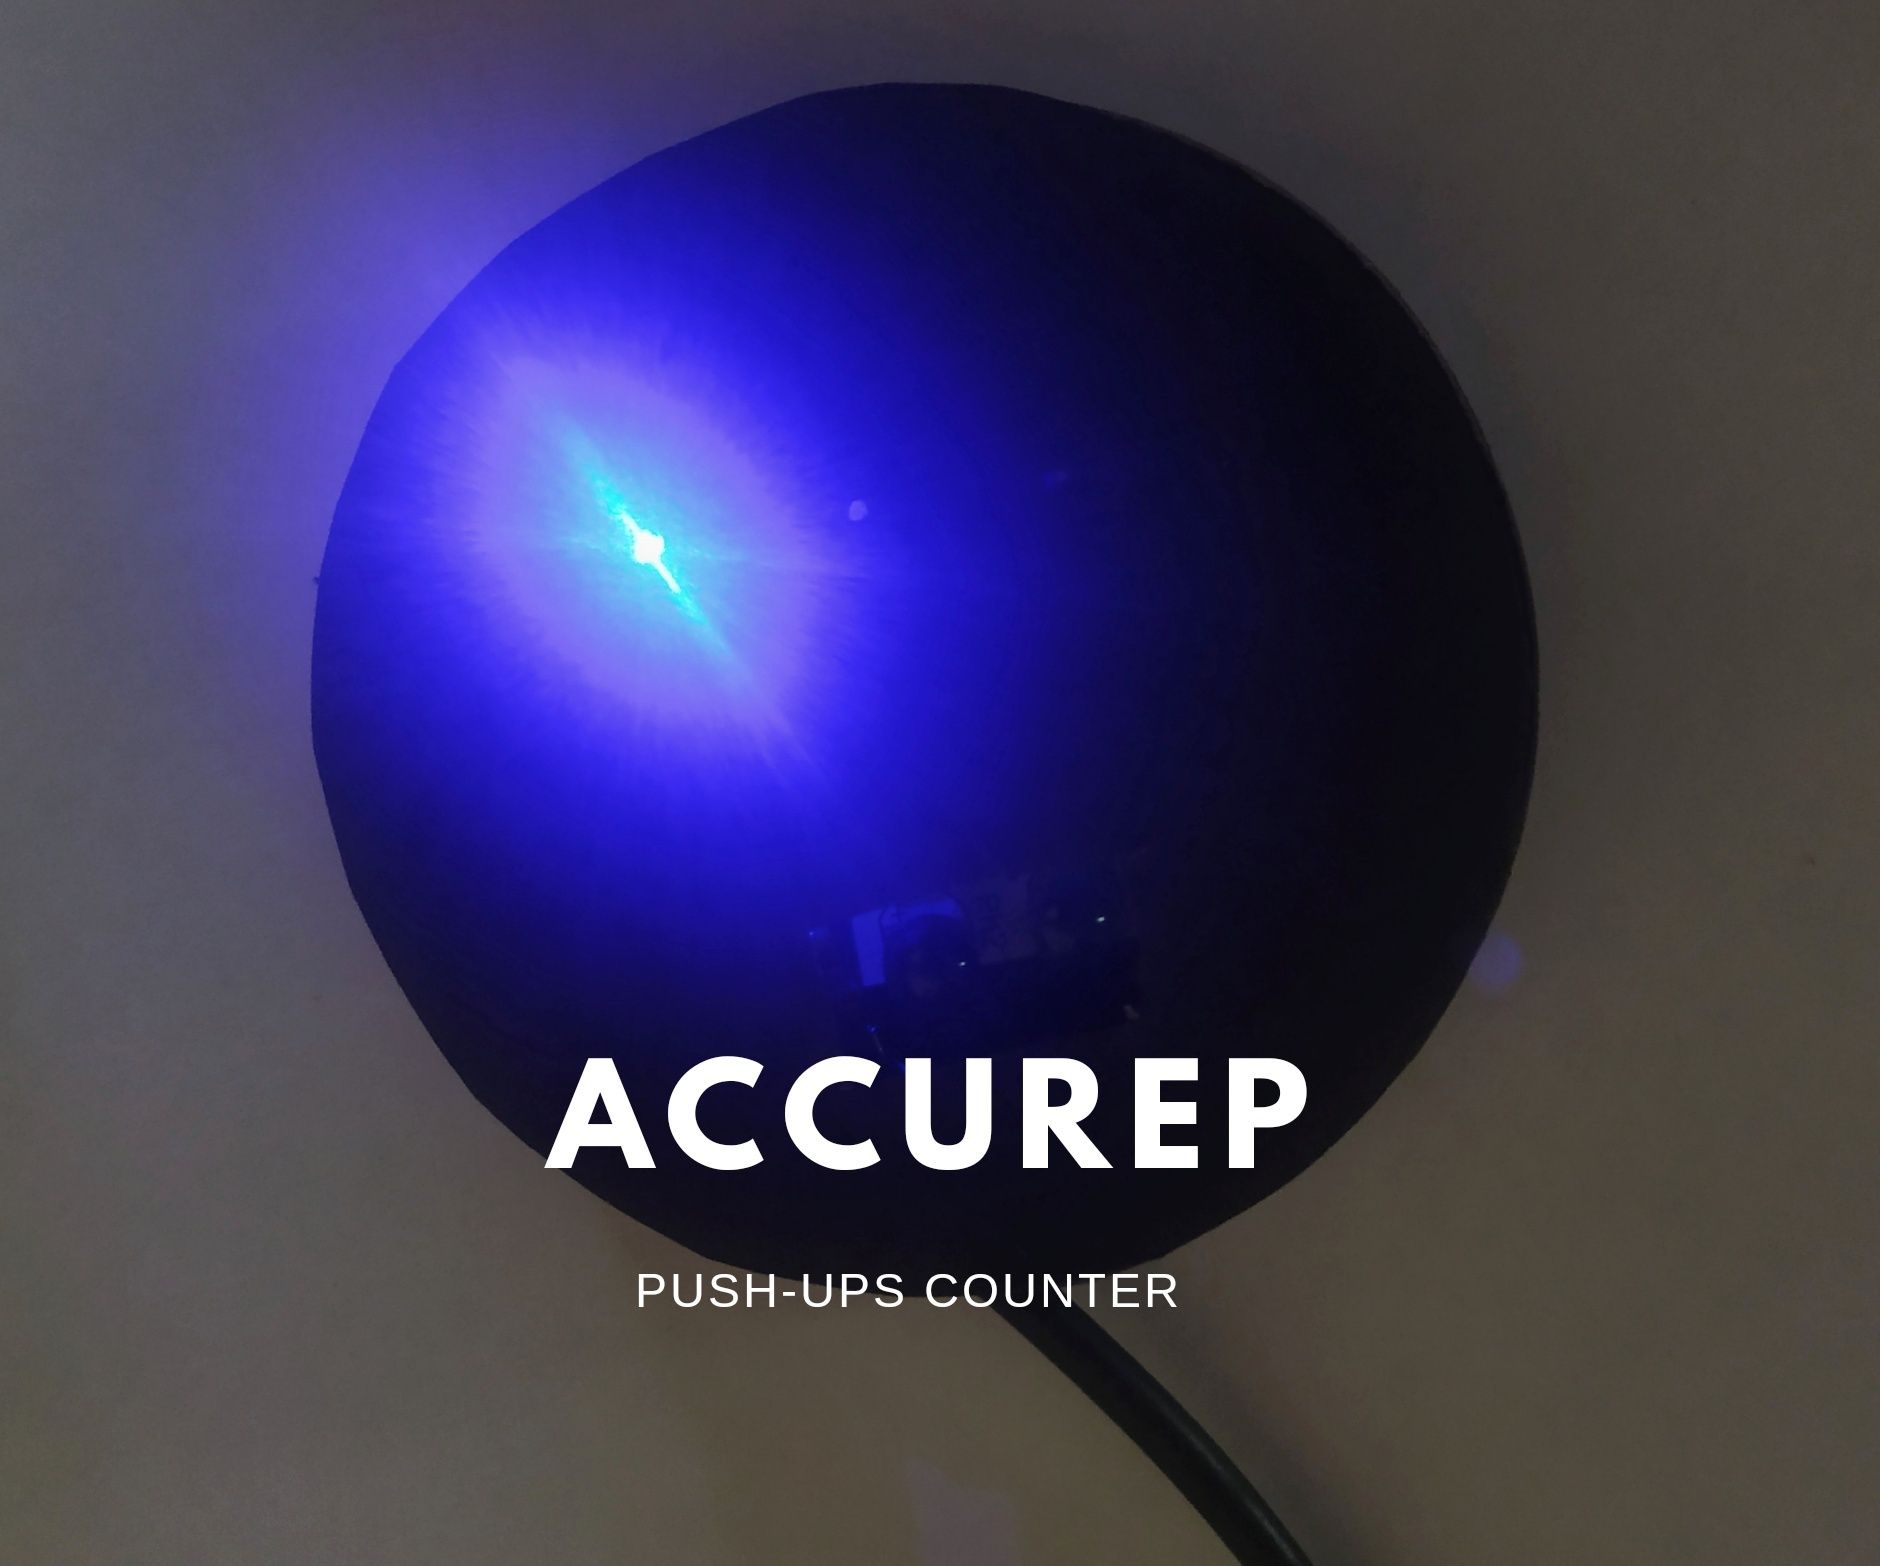 AccuRep: a Push-up Counting Device